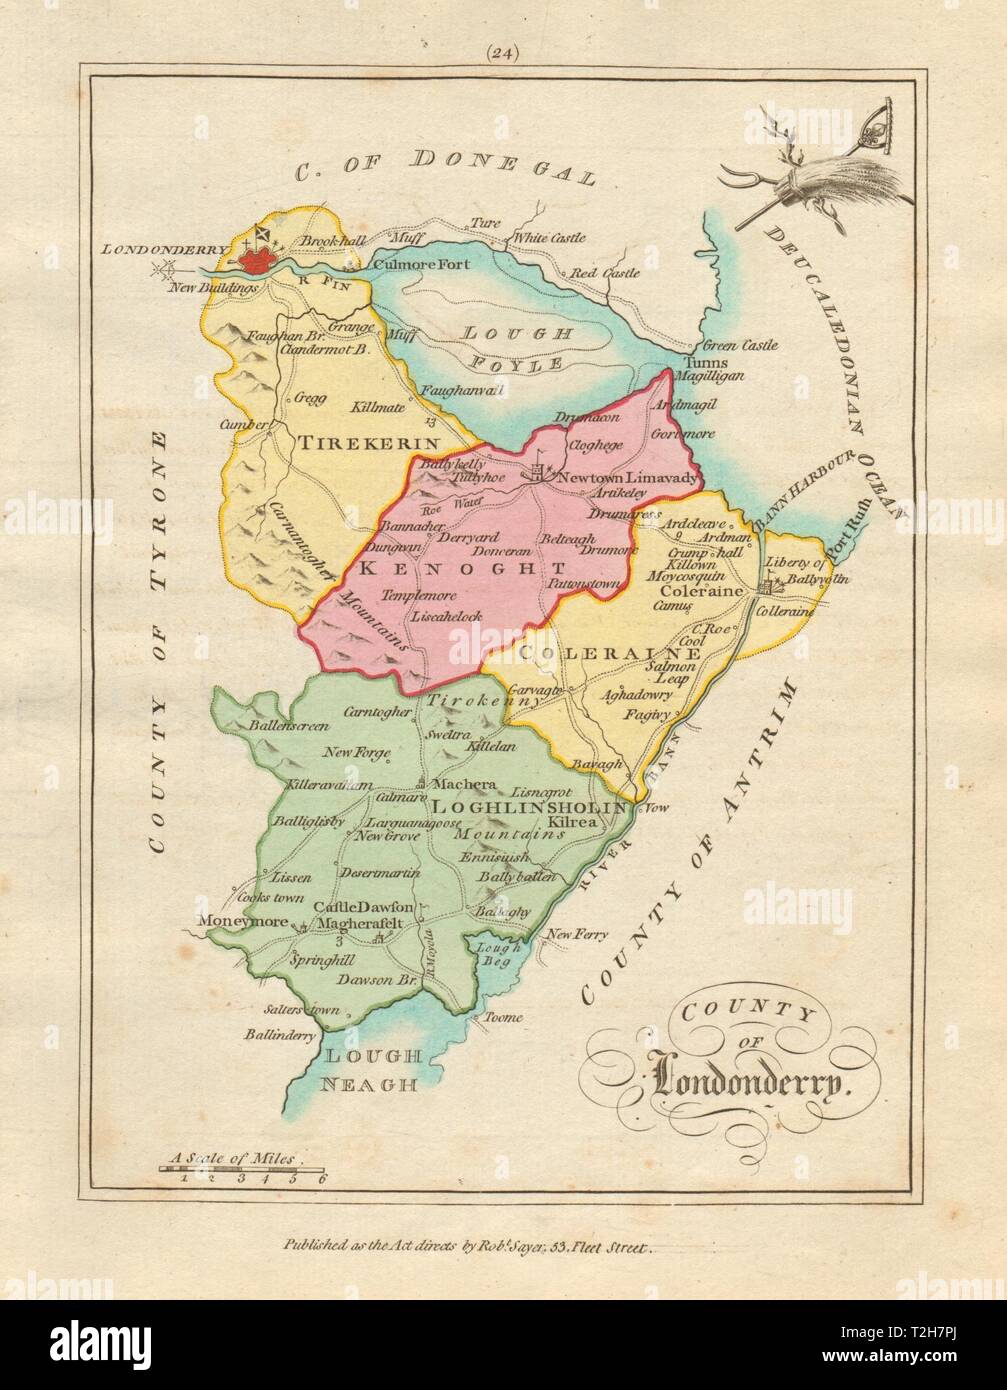 County of Londonderry, Ulster. Antique copperplate map by Scalé / Sayer 1788 Stock Photo